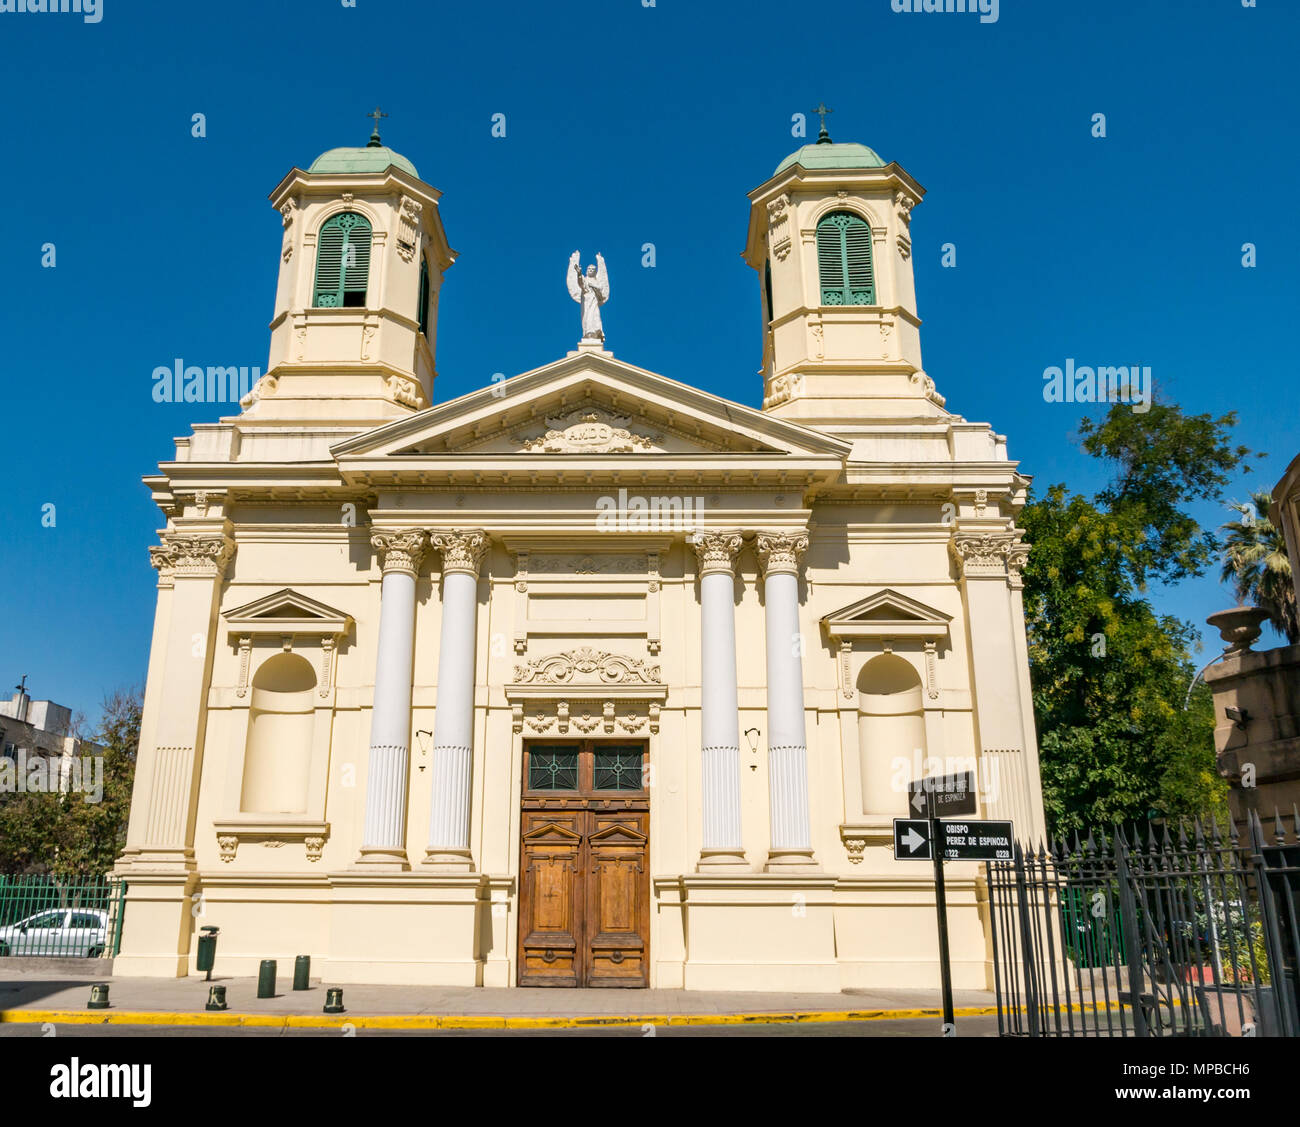 Historic yellow Holy Guardian Angels parish Catholic church with ornate bell towers, Providencia, Santiago, Chile Stock Photo